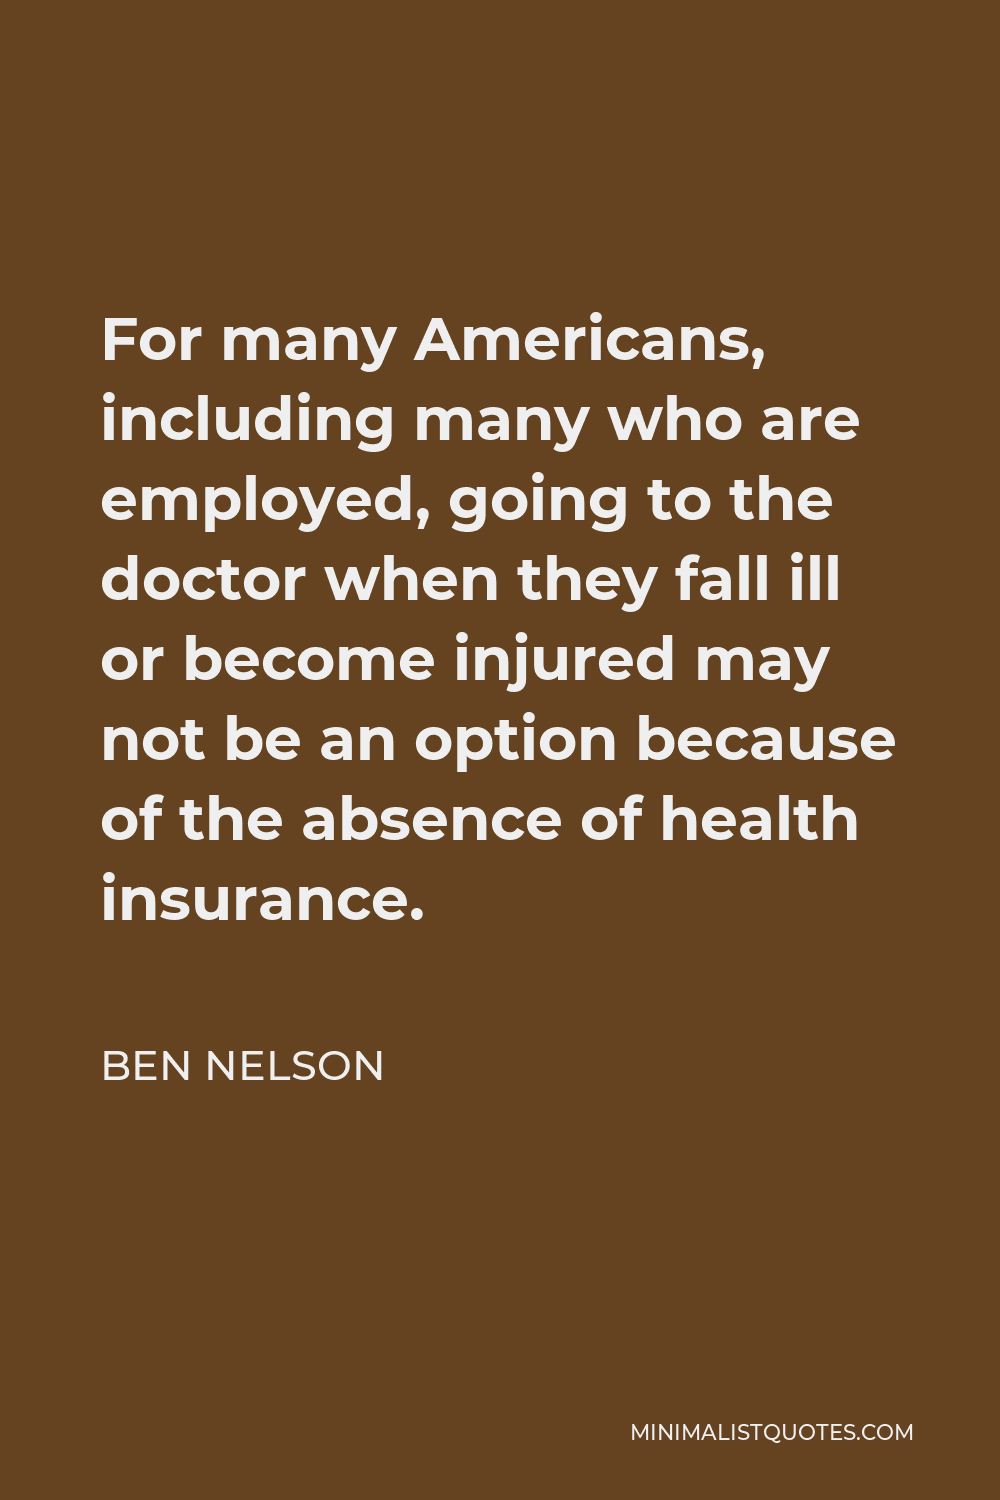 Ben Nelson Quote - For many Americans, including many who are employed, going to the doctor when they fall ill or become injured may not be an option because of the absence of health insurance.